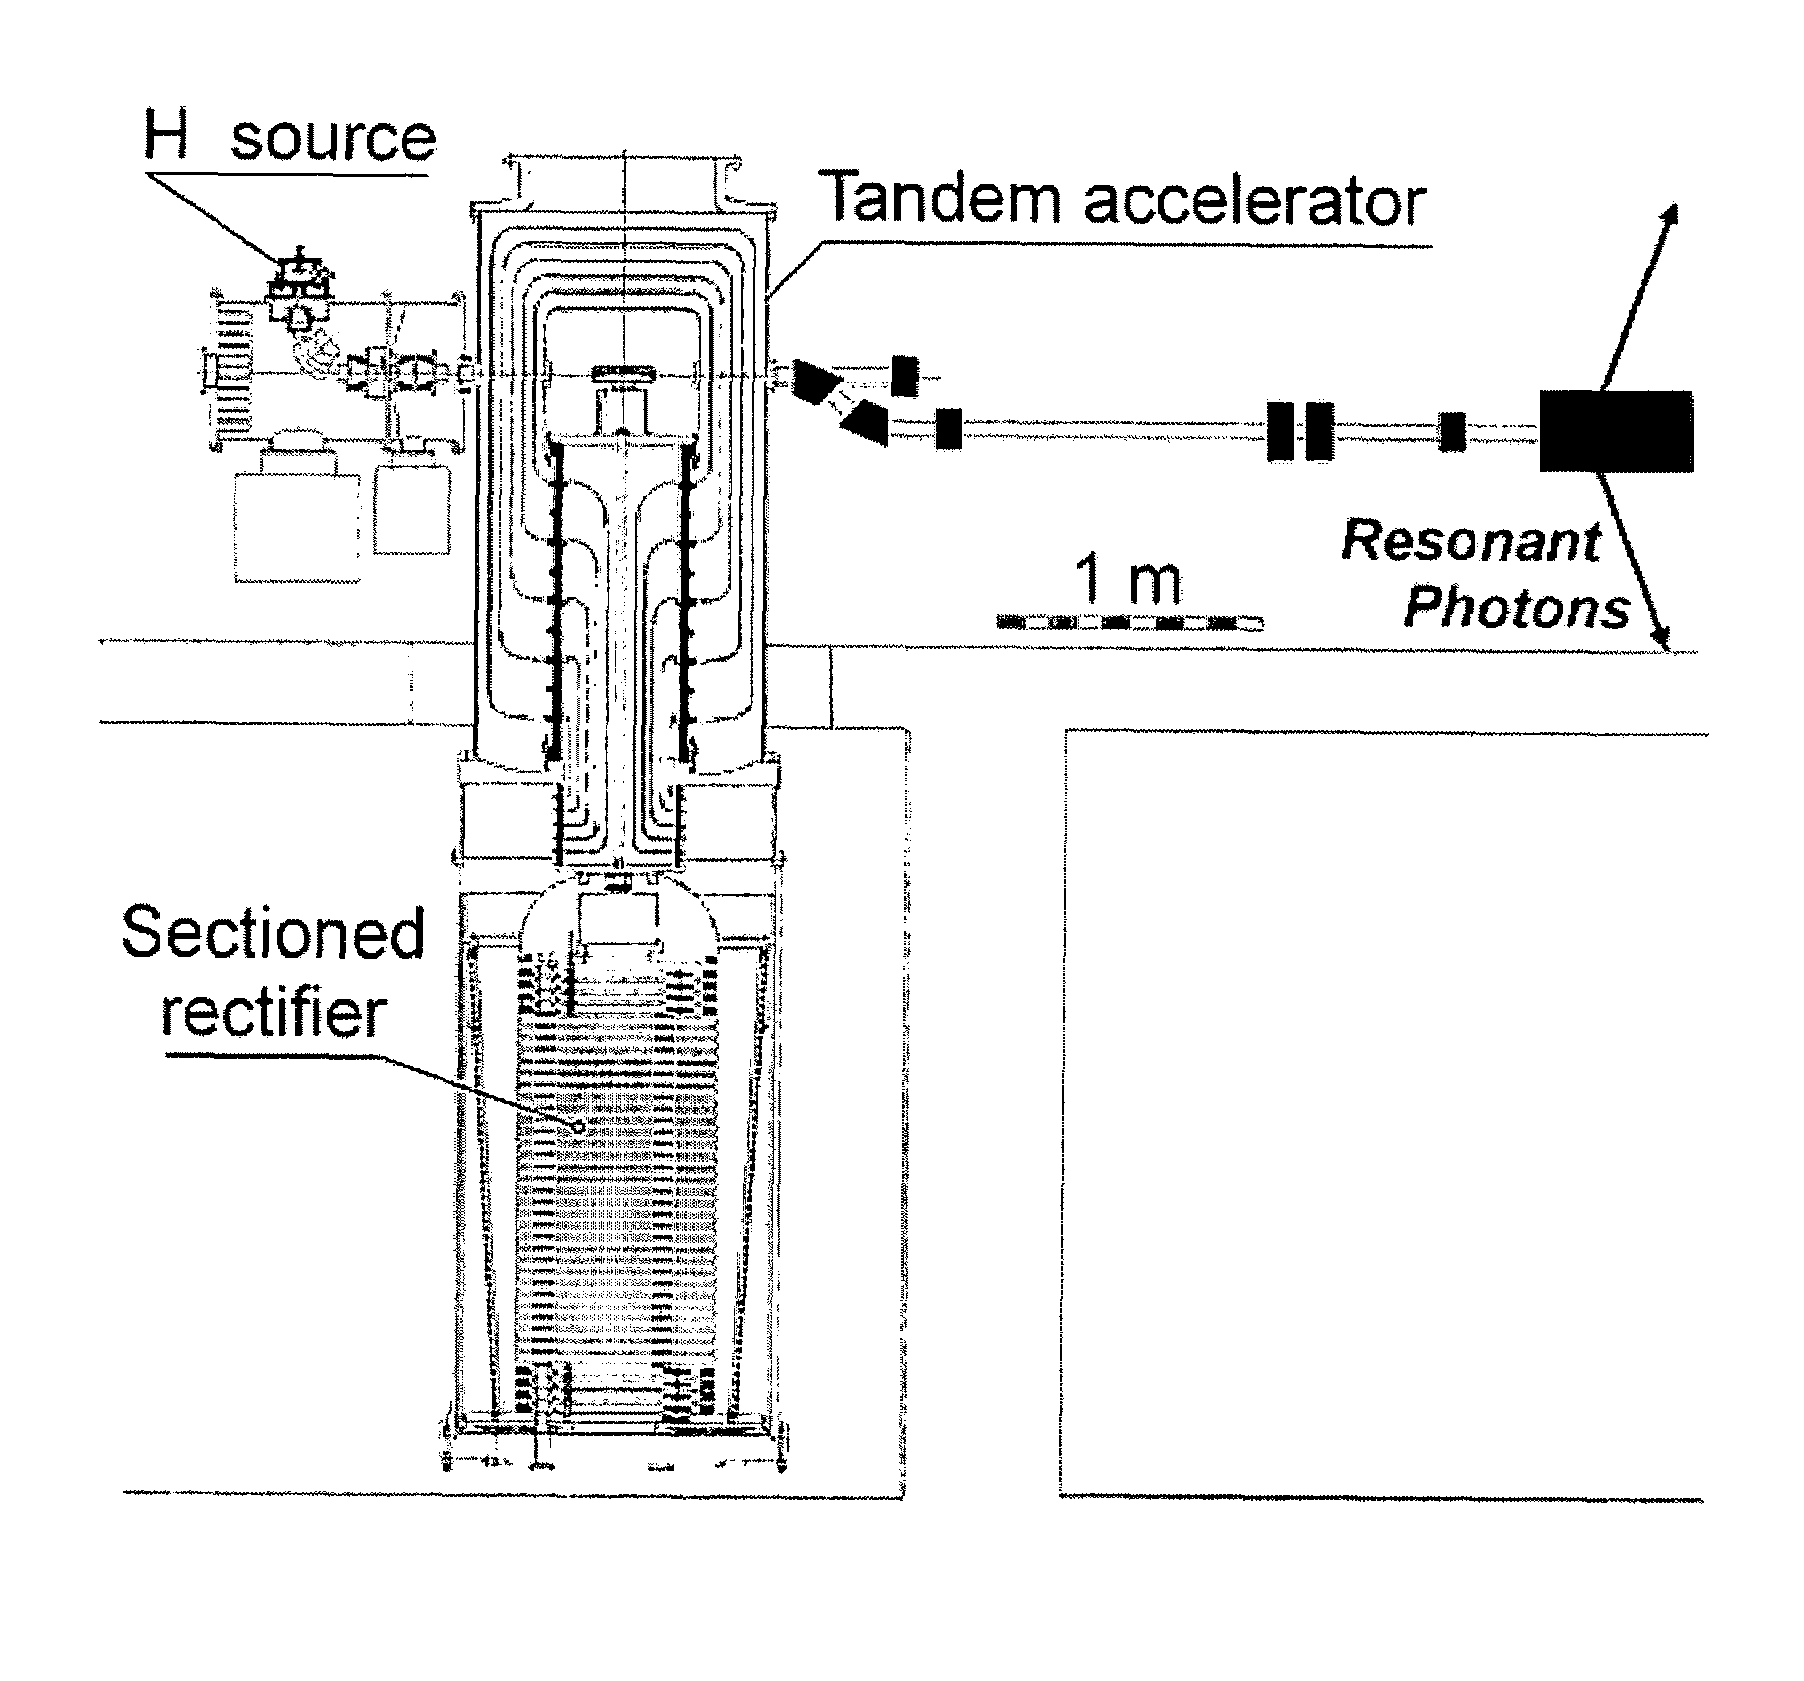 System and method for detecting concealed nuclear materials, radiological materials and chemical explosives